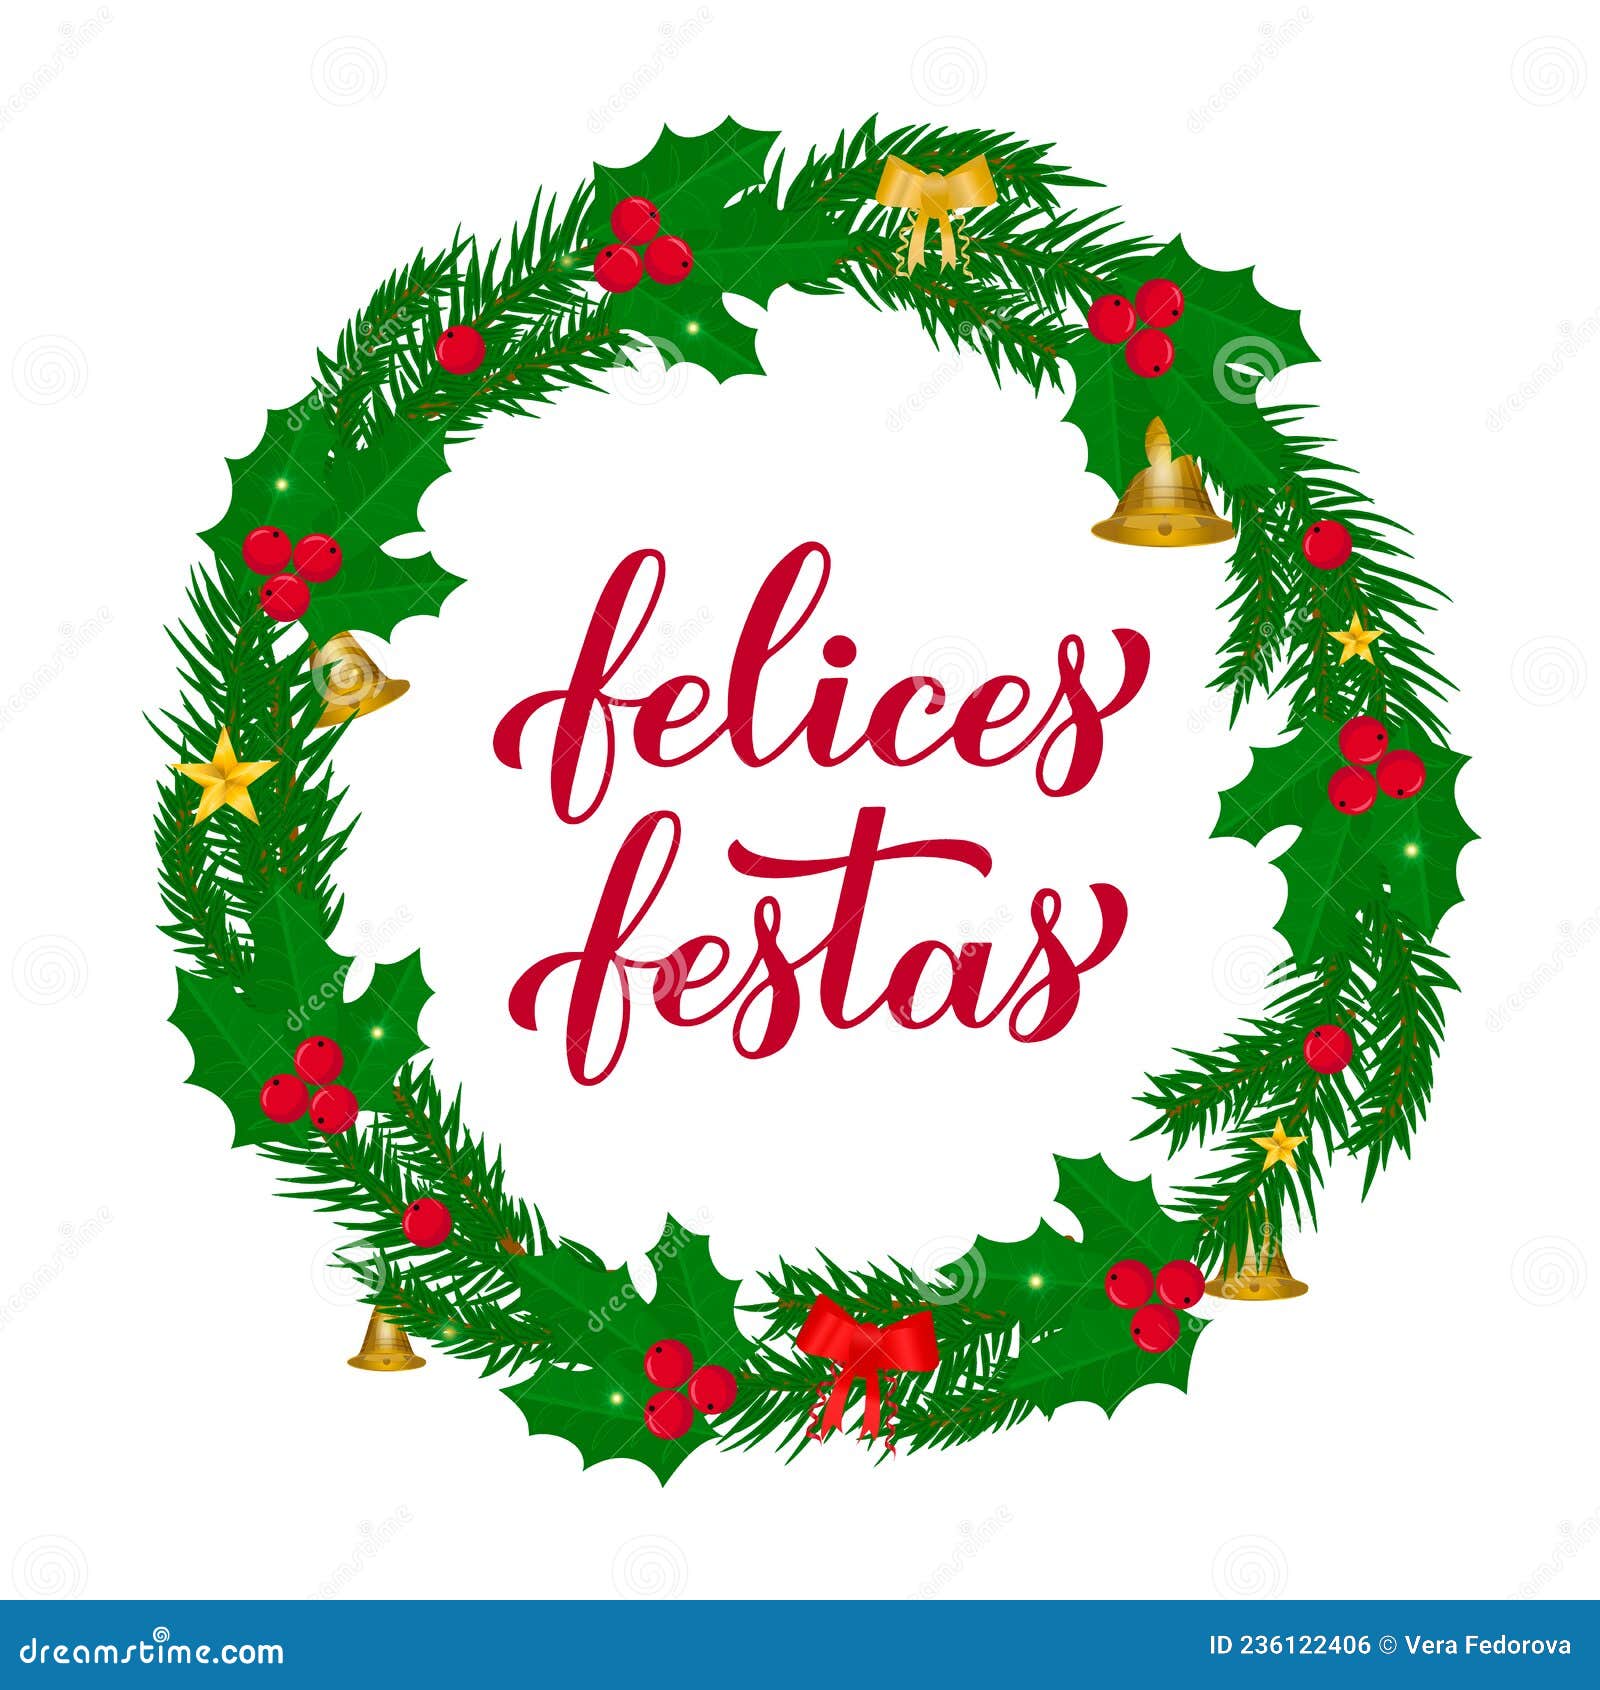 felices fiestas calligraphy hand lettering with wreath of fir tree branches. happy holidays in spanish. christmas and